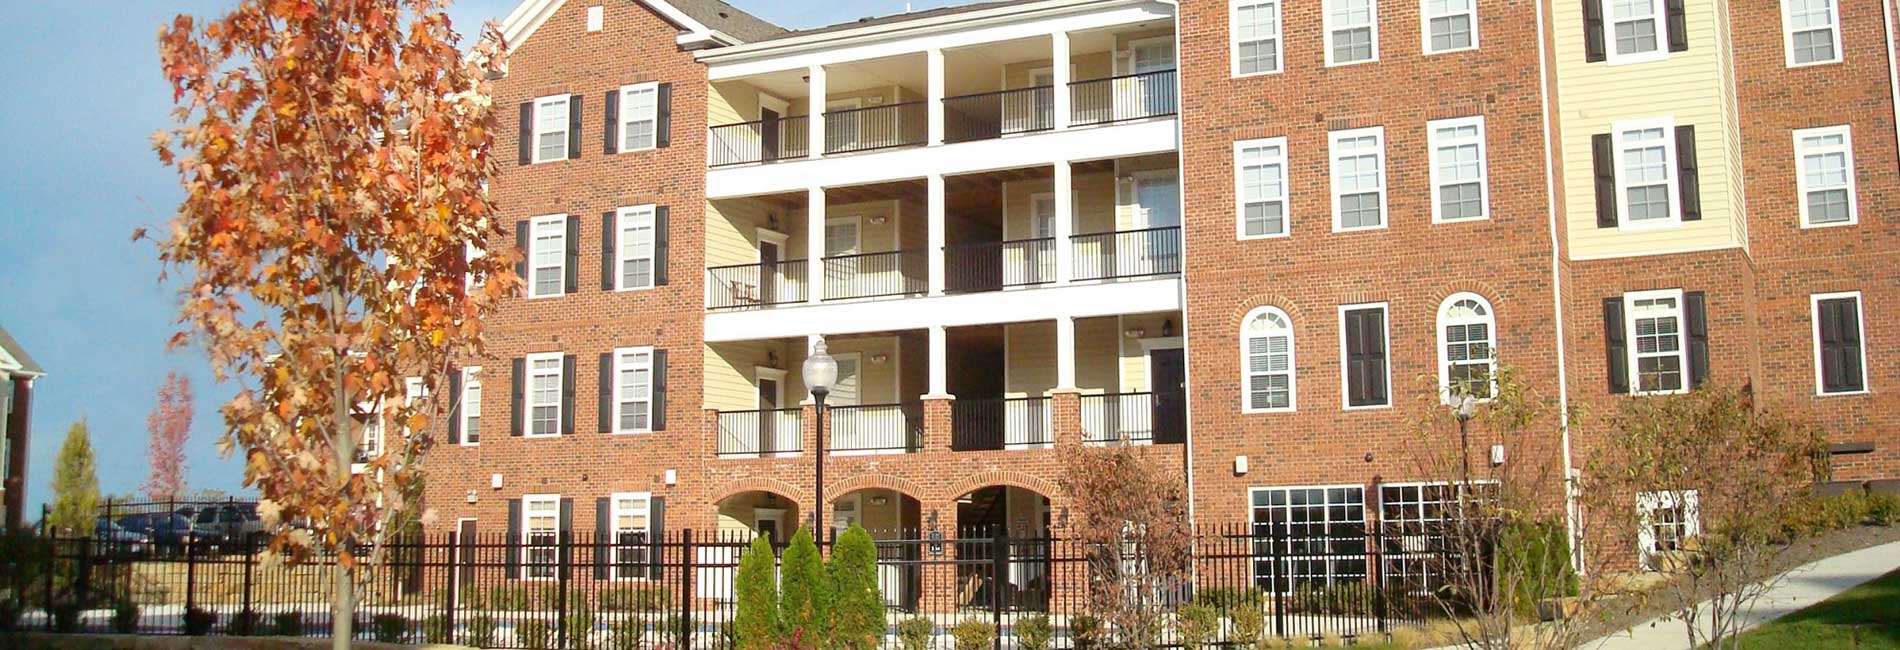 The Province Apartments for Rent in Fairborn, OH